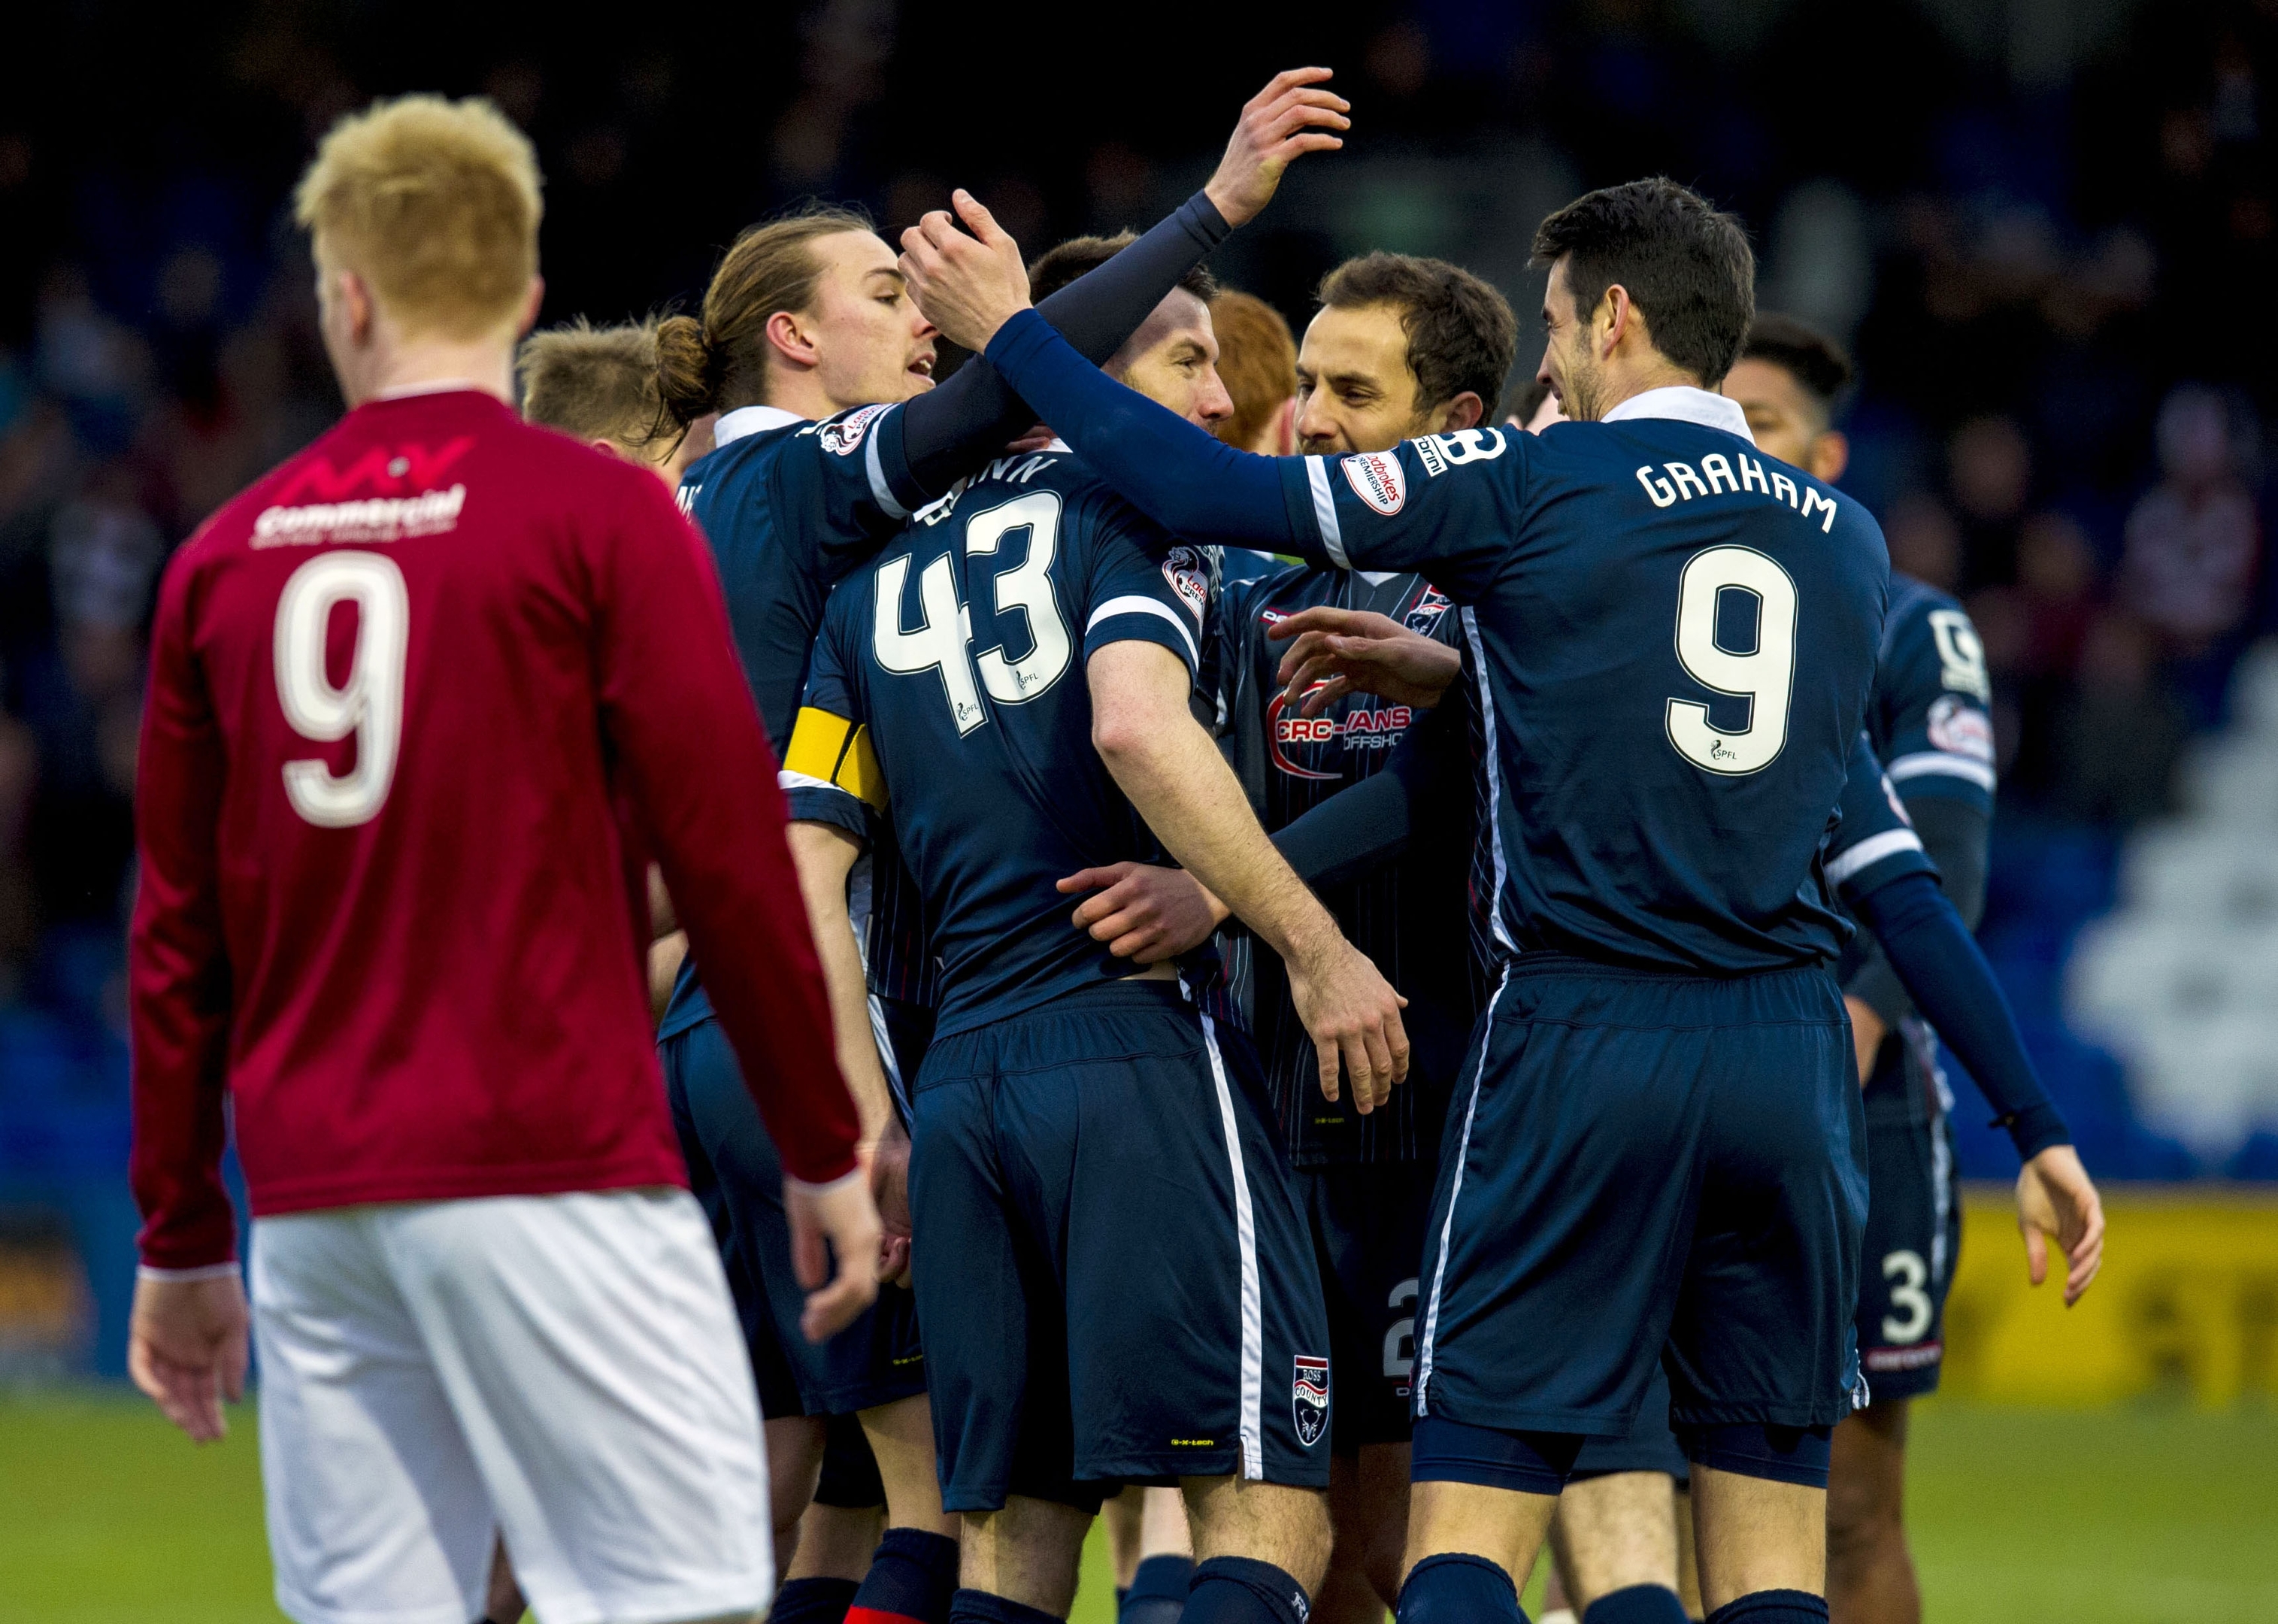 Ross County's Paul Quinn (centre) celebrates after making it 1-0